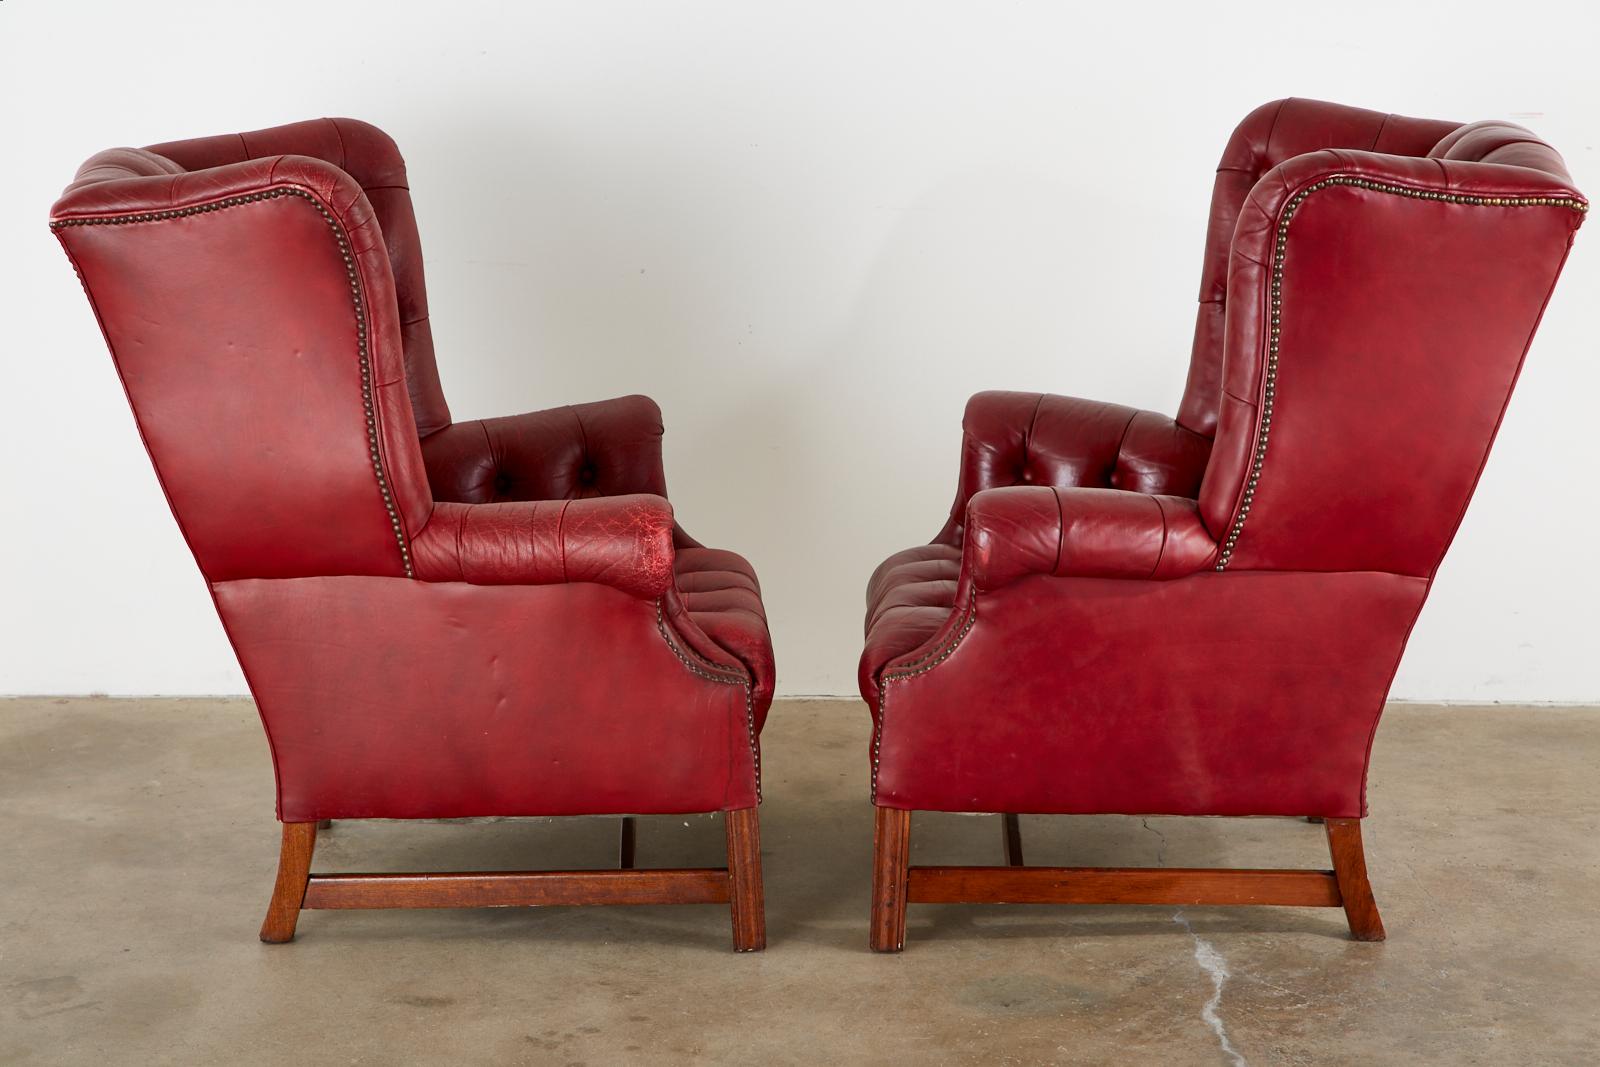 Hand-Crafted Pair of English Georgian Tufted Red Leather Wingback Chairs